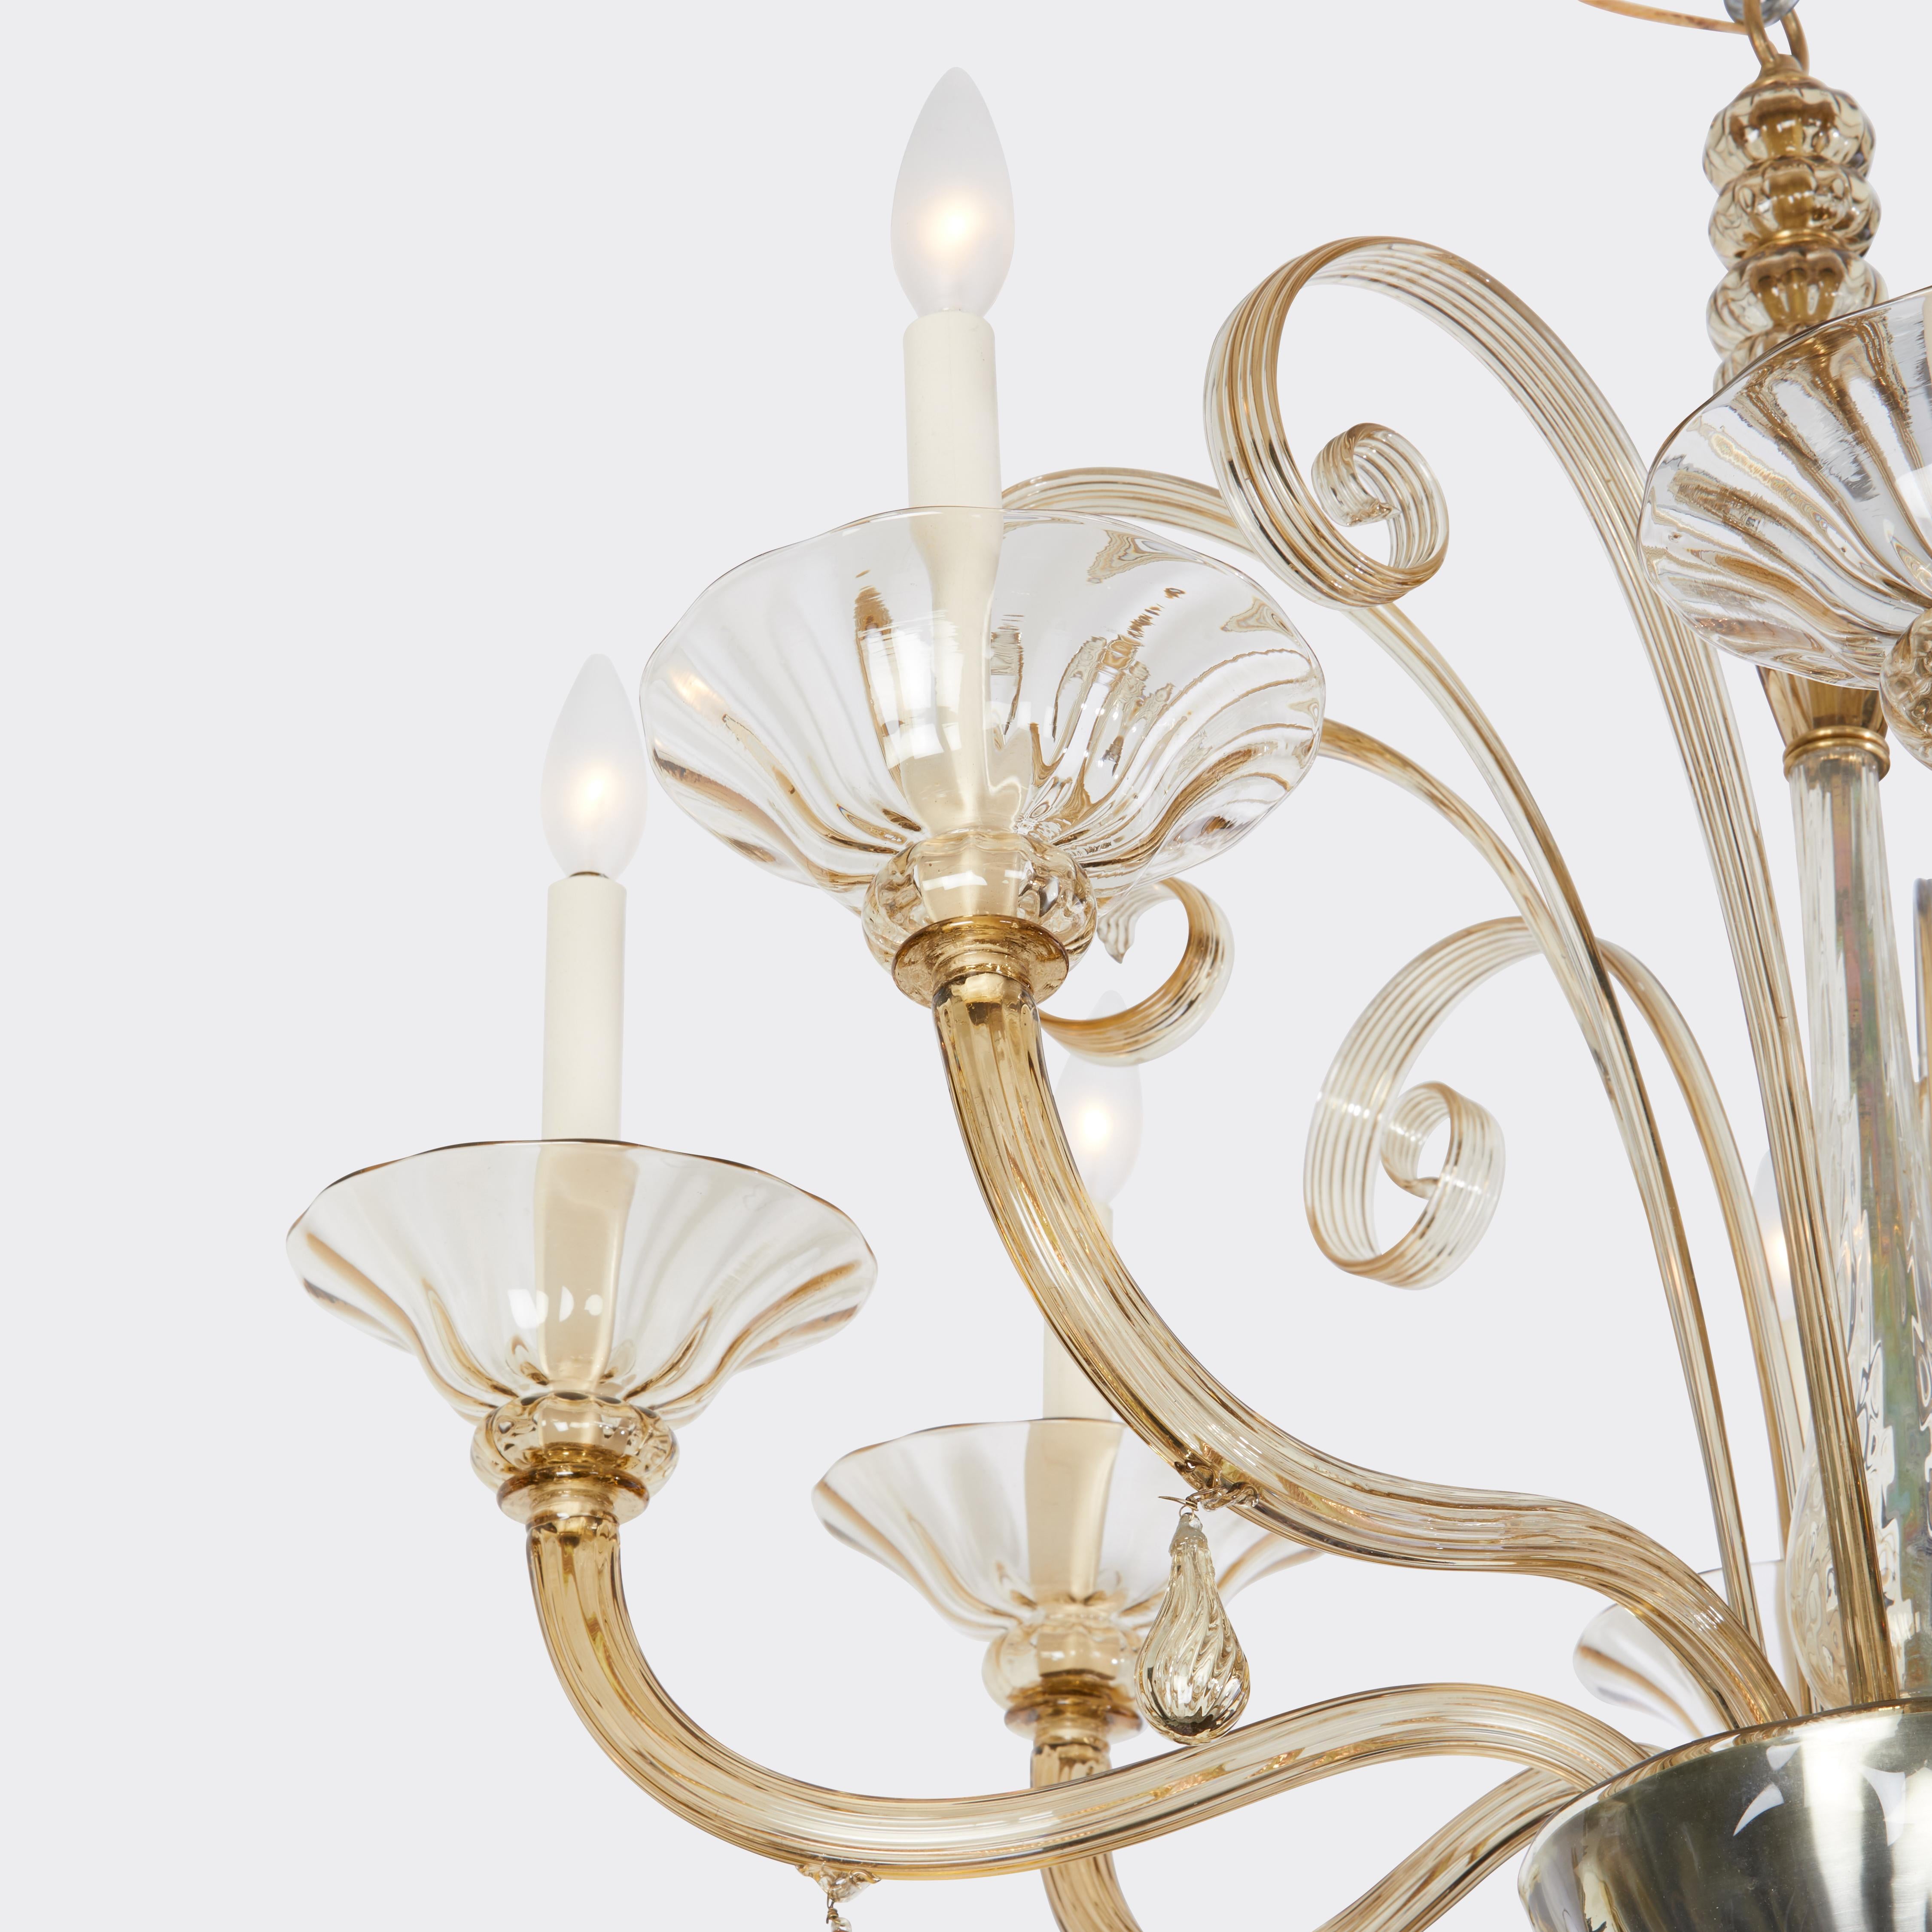 An Italian hand-blown pale amber Murano glass chandelier with eight arms issuing from the handblown dish center below a stem with cylindrical glass elements covering the stem. Each arm with tear drop shaped elements hanging, and bowl with glass drop